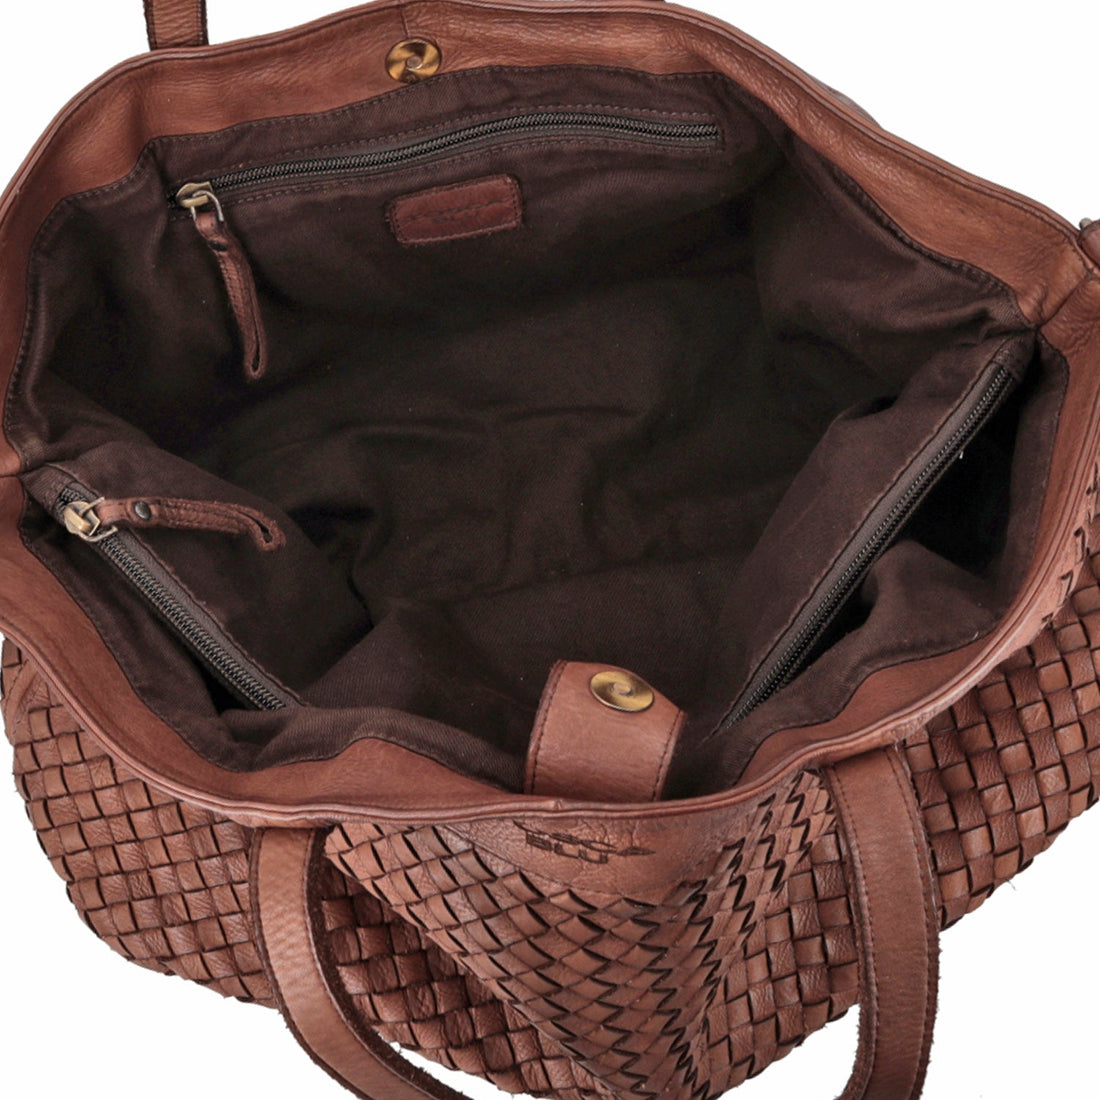 DARK BROWN PAPAVERO SHOPPING BAG IN WOVEN LEATHER